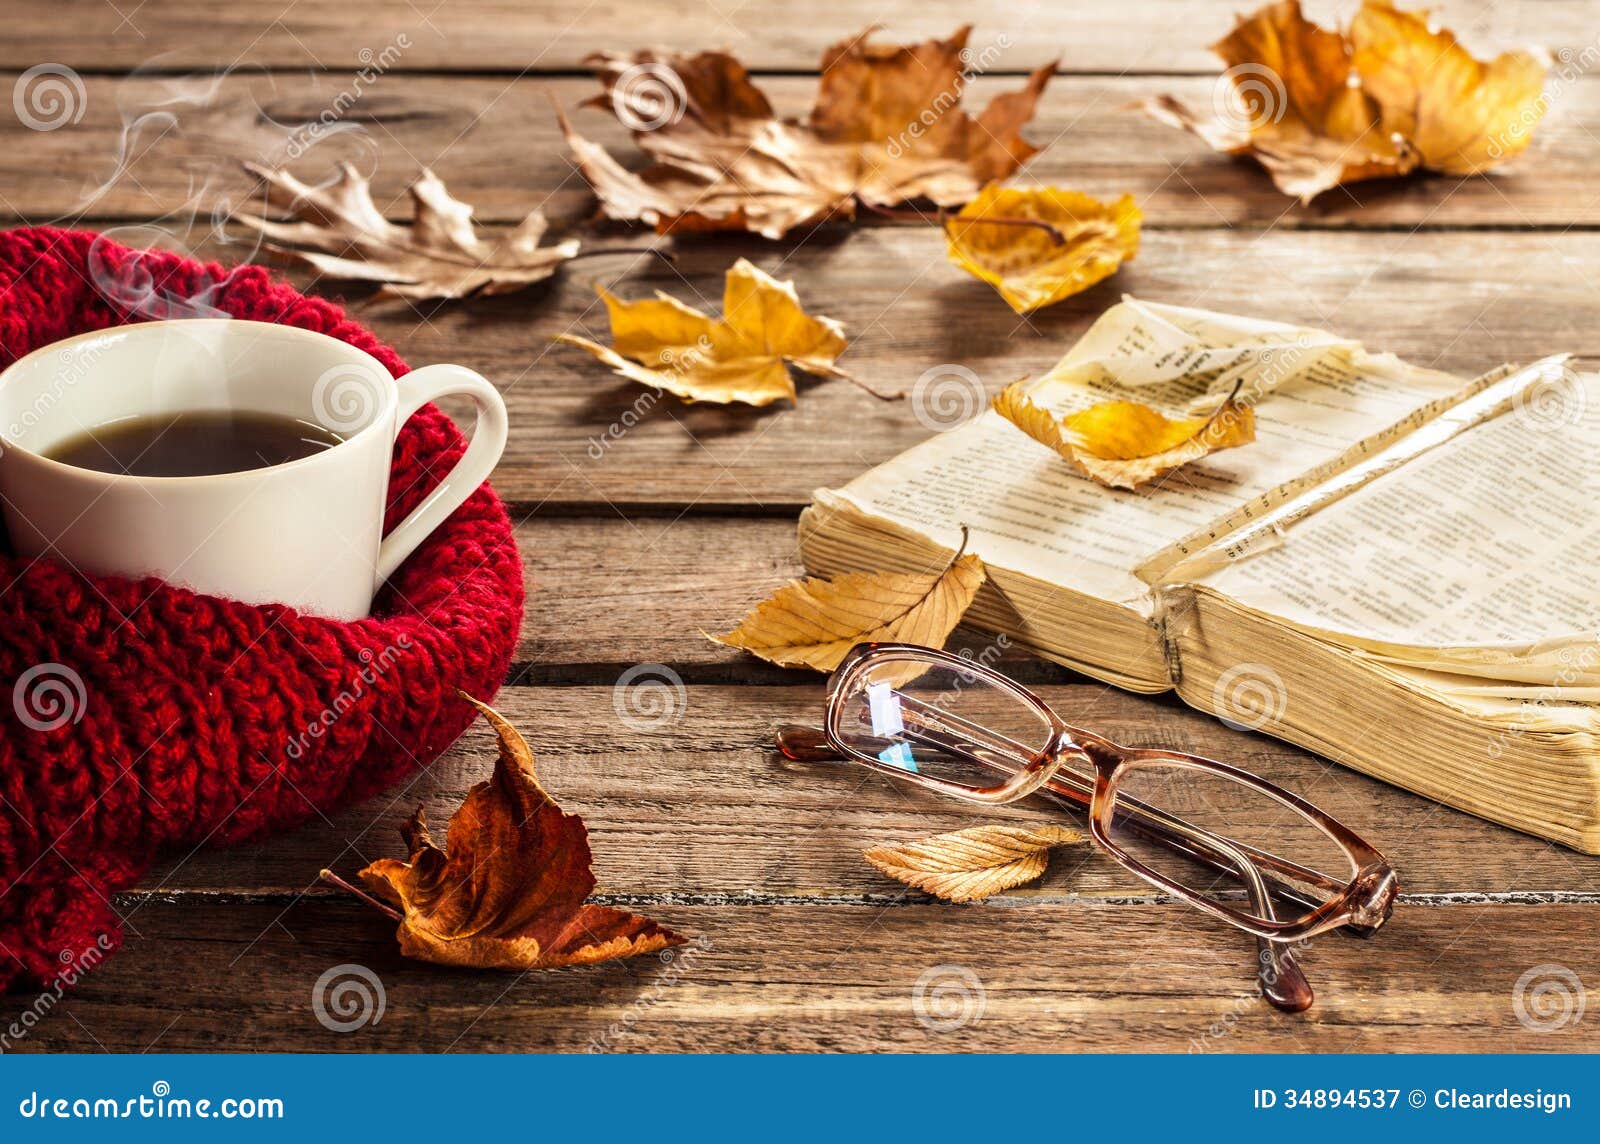 hot-coffee-book-glasses-autumn-leaves-wood-background-vintage-relax-retirement-concept-34894537.jpg